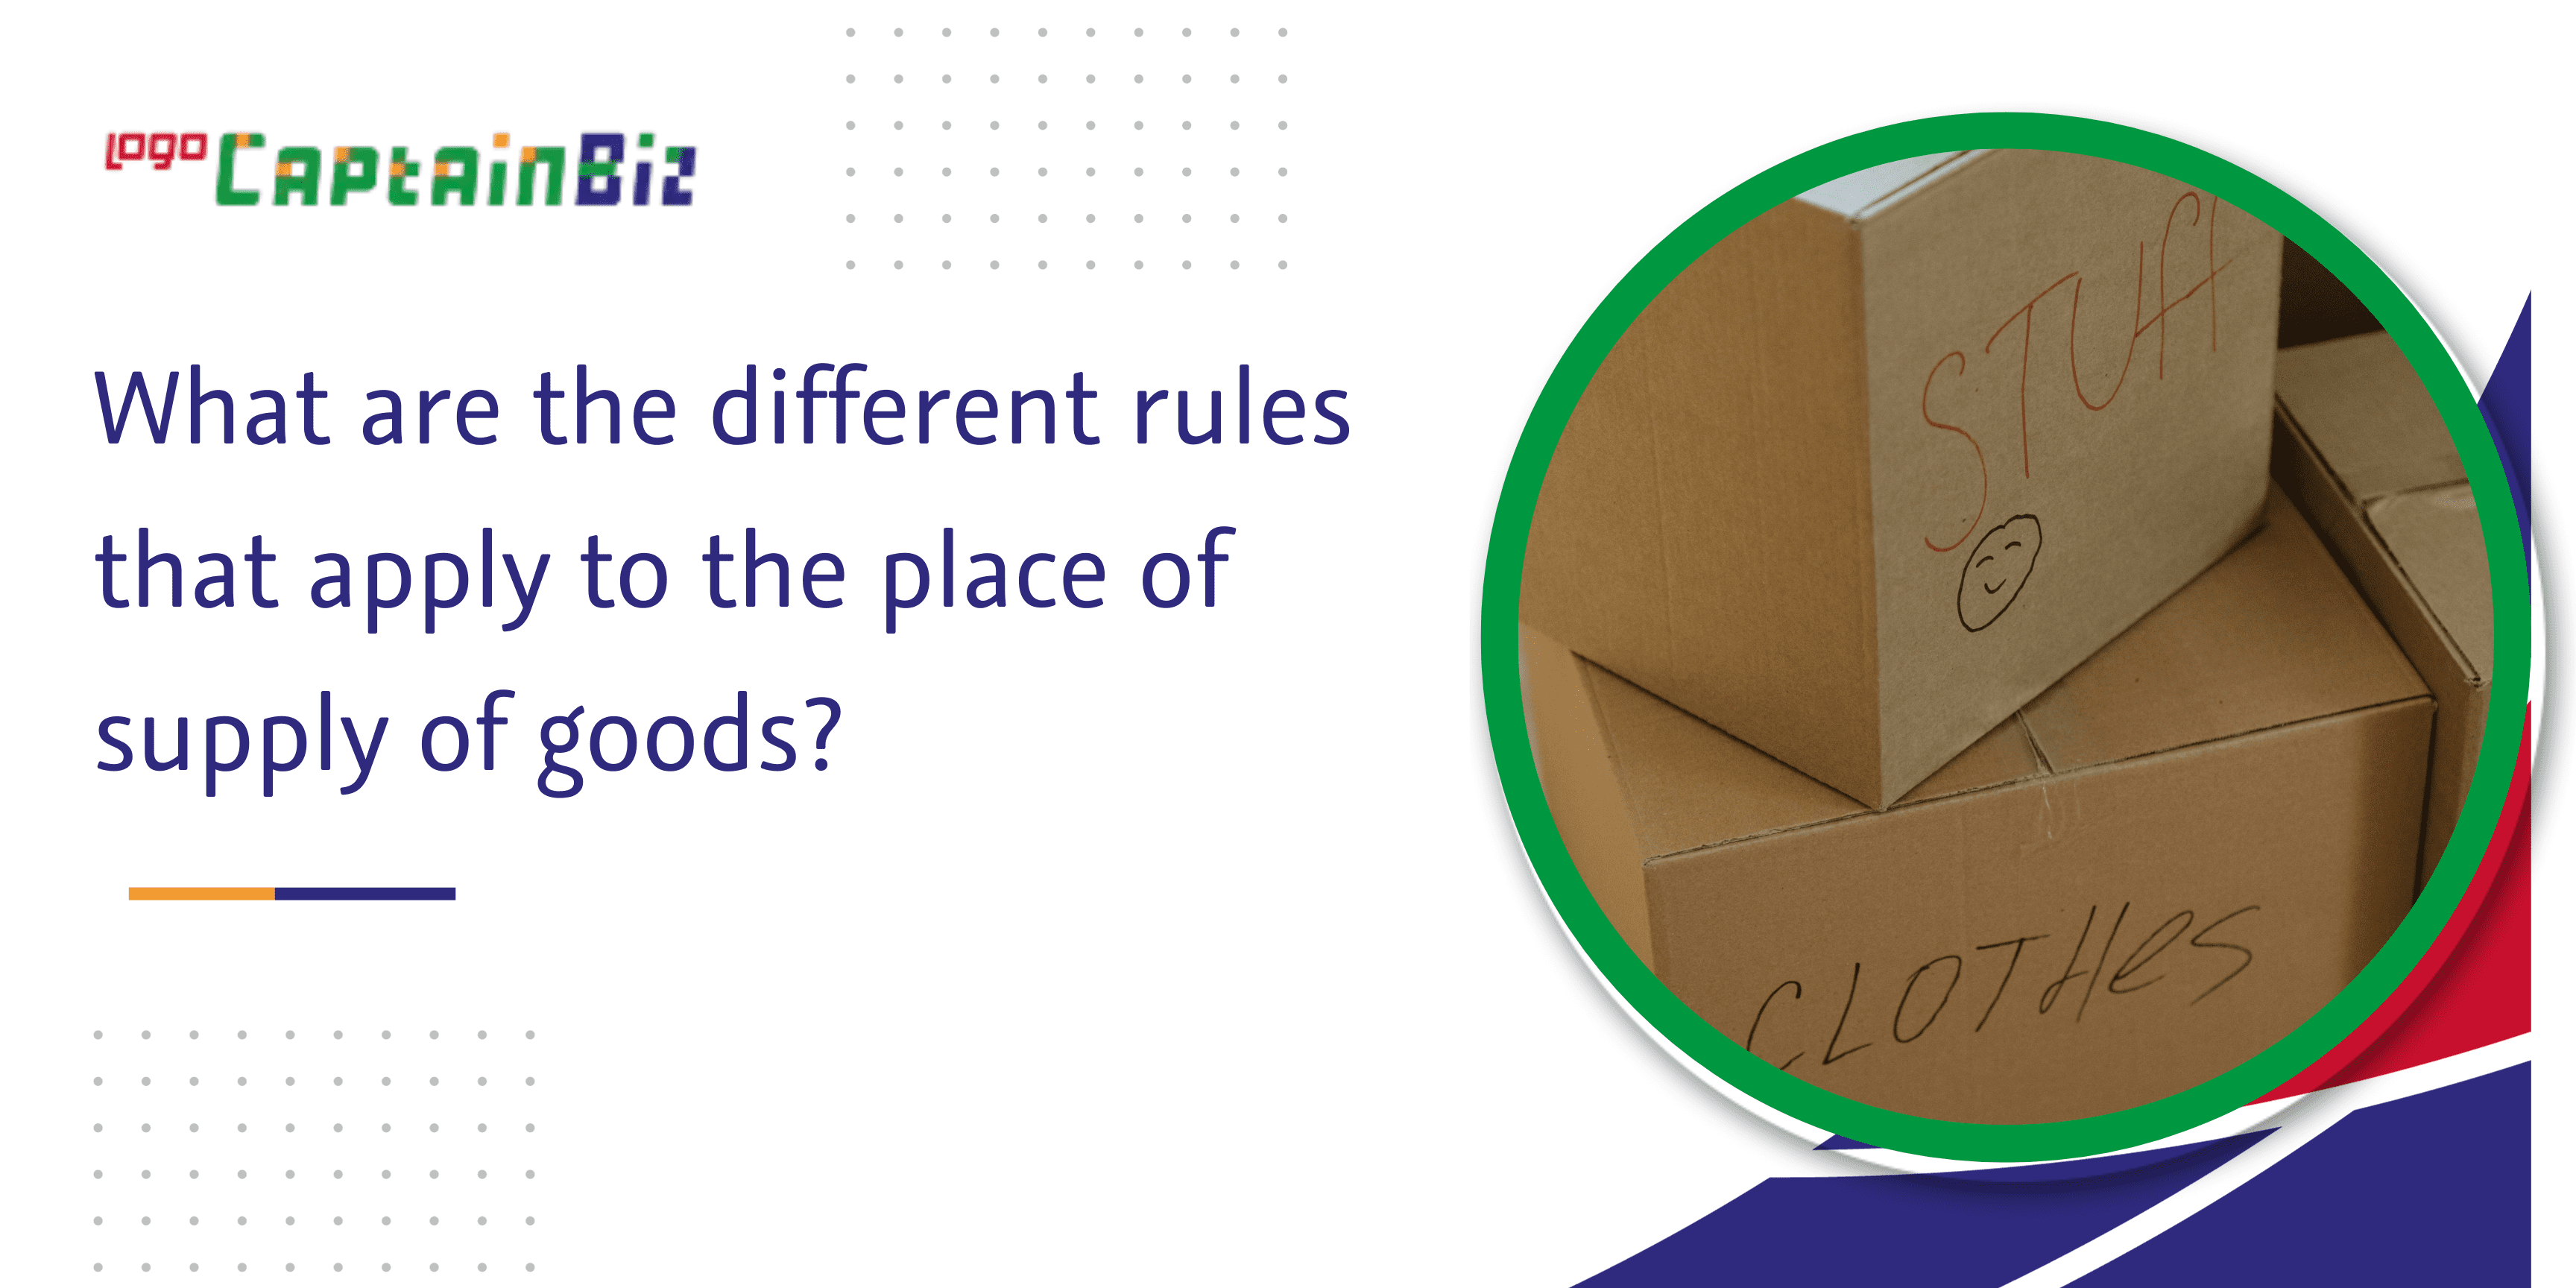 What are the different rules that apply to the place of supply of goods?